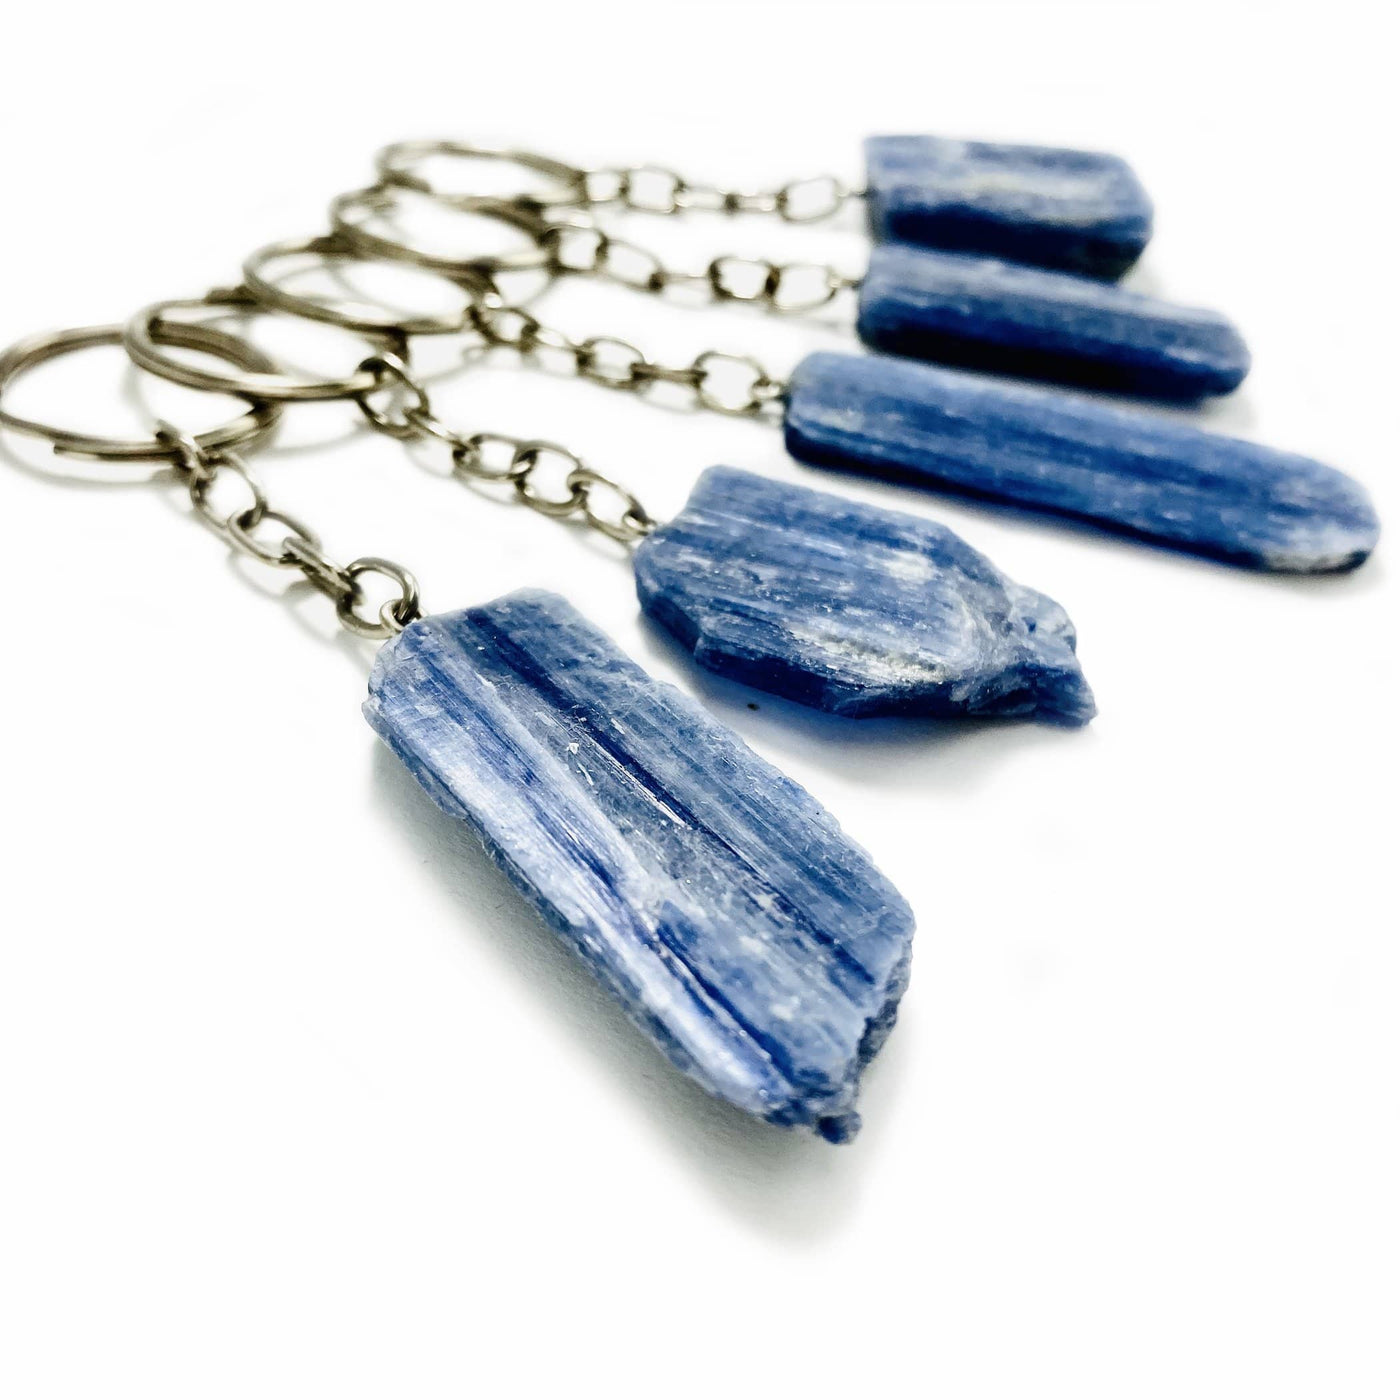 side view of Blue Kyanite Key Chain for thickness reference